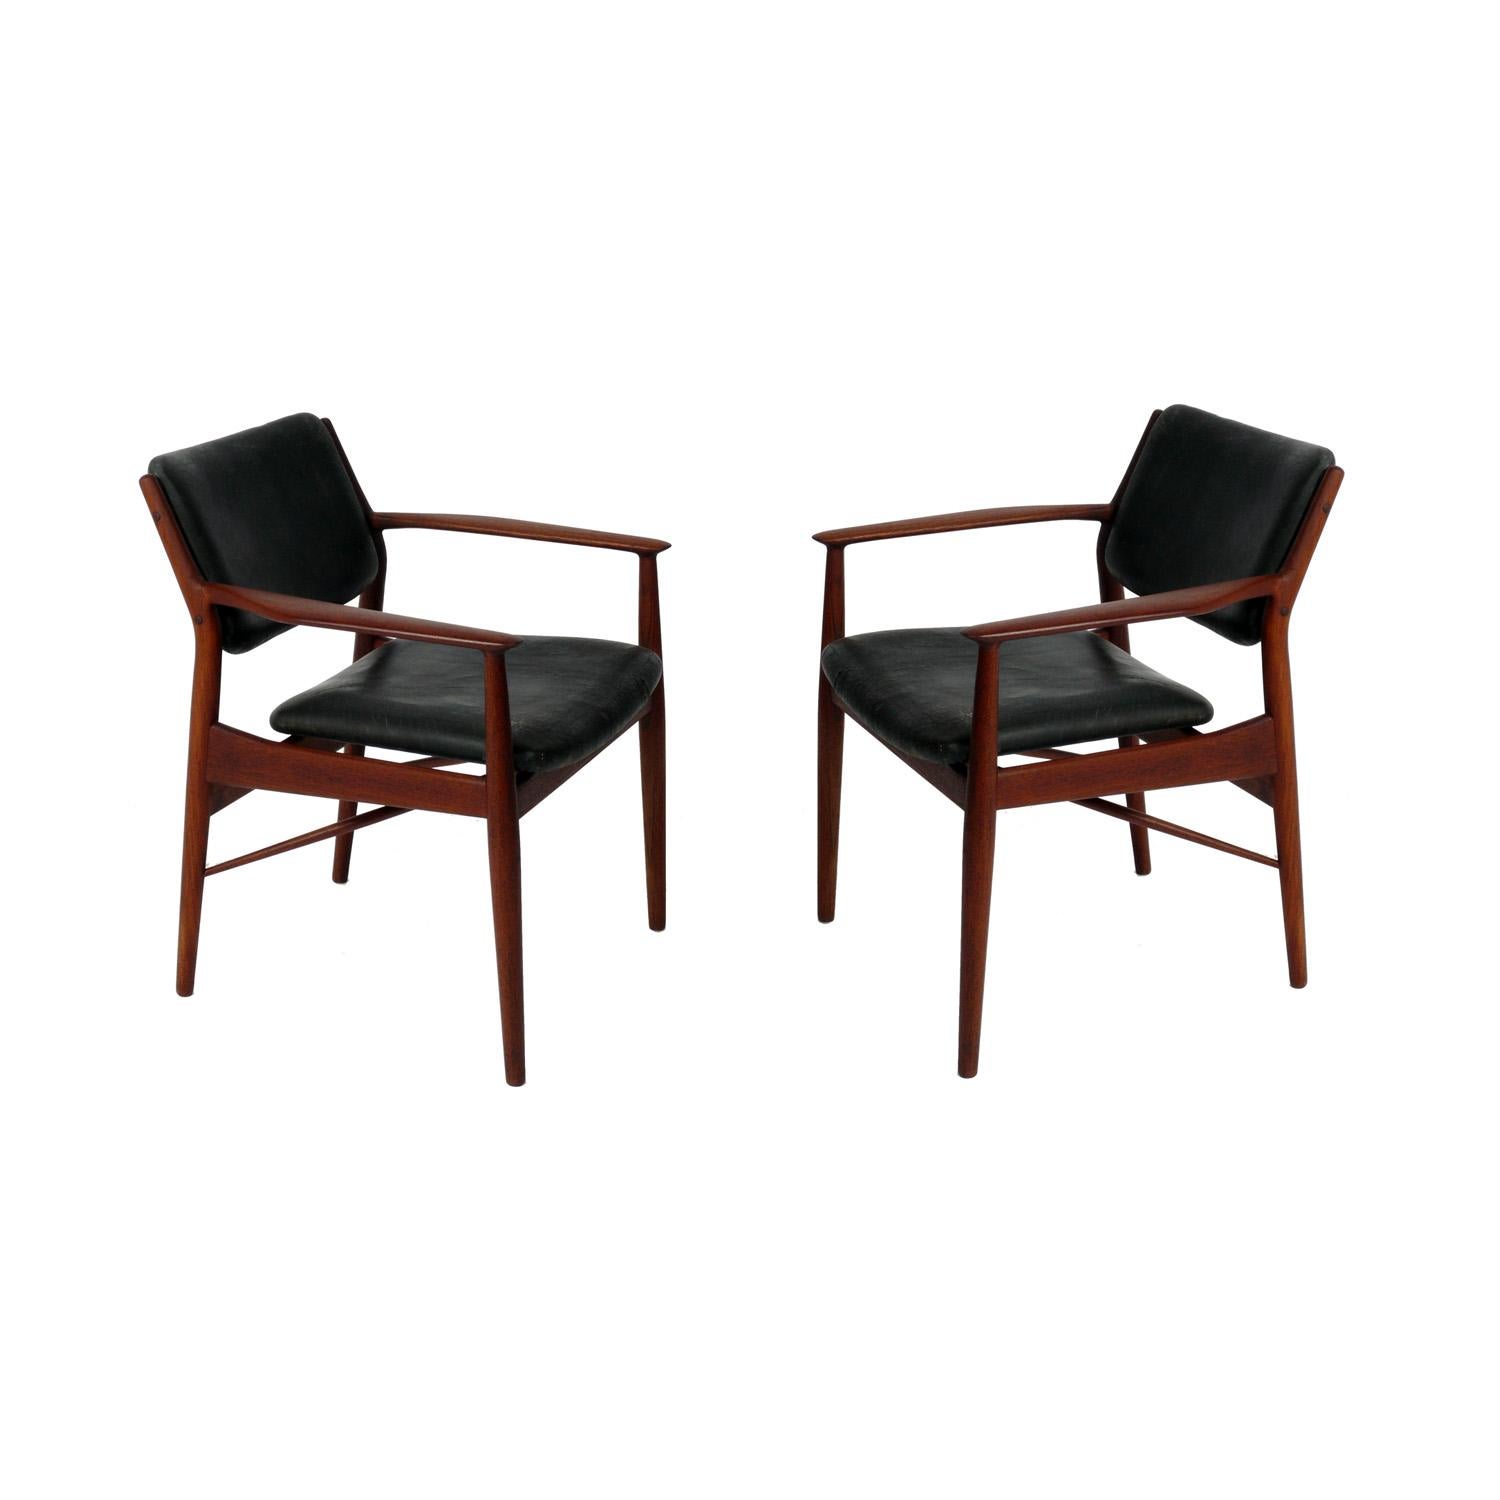 Set of ten Danish modern dining chairs, designed by Arne Vodder for Sibast, Denmark, circa 1960s. They are currently being reupholstered and can be completed in your fabric. Simply send us 8 yards of your fabric after purchase. The price noted